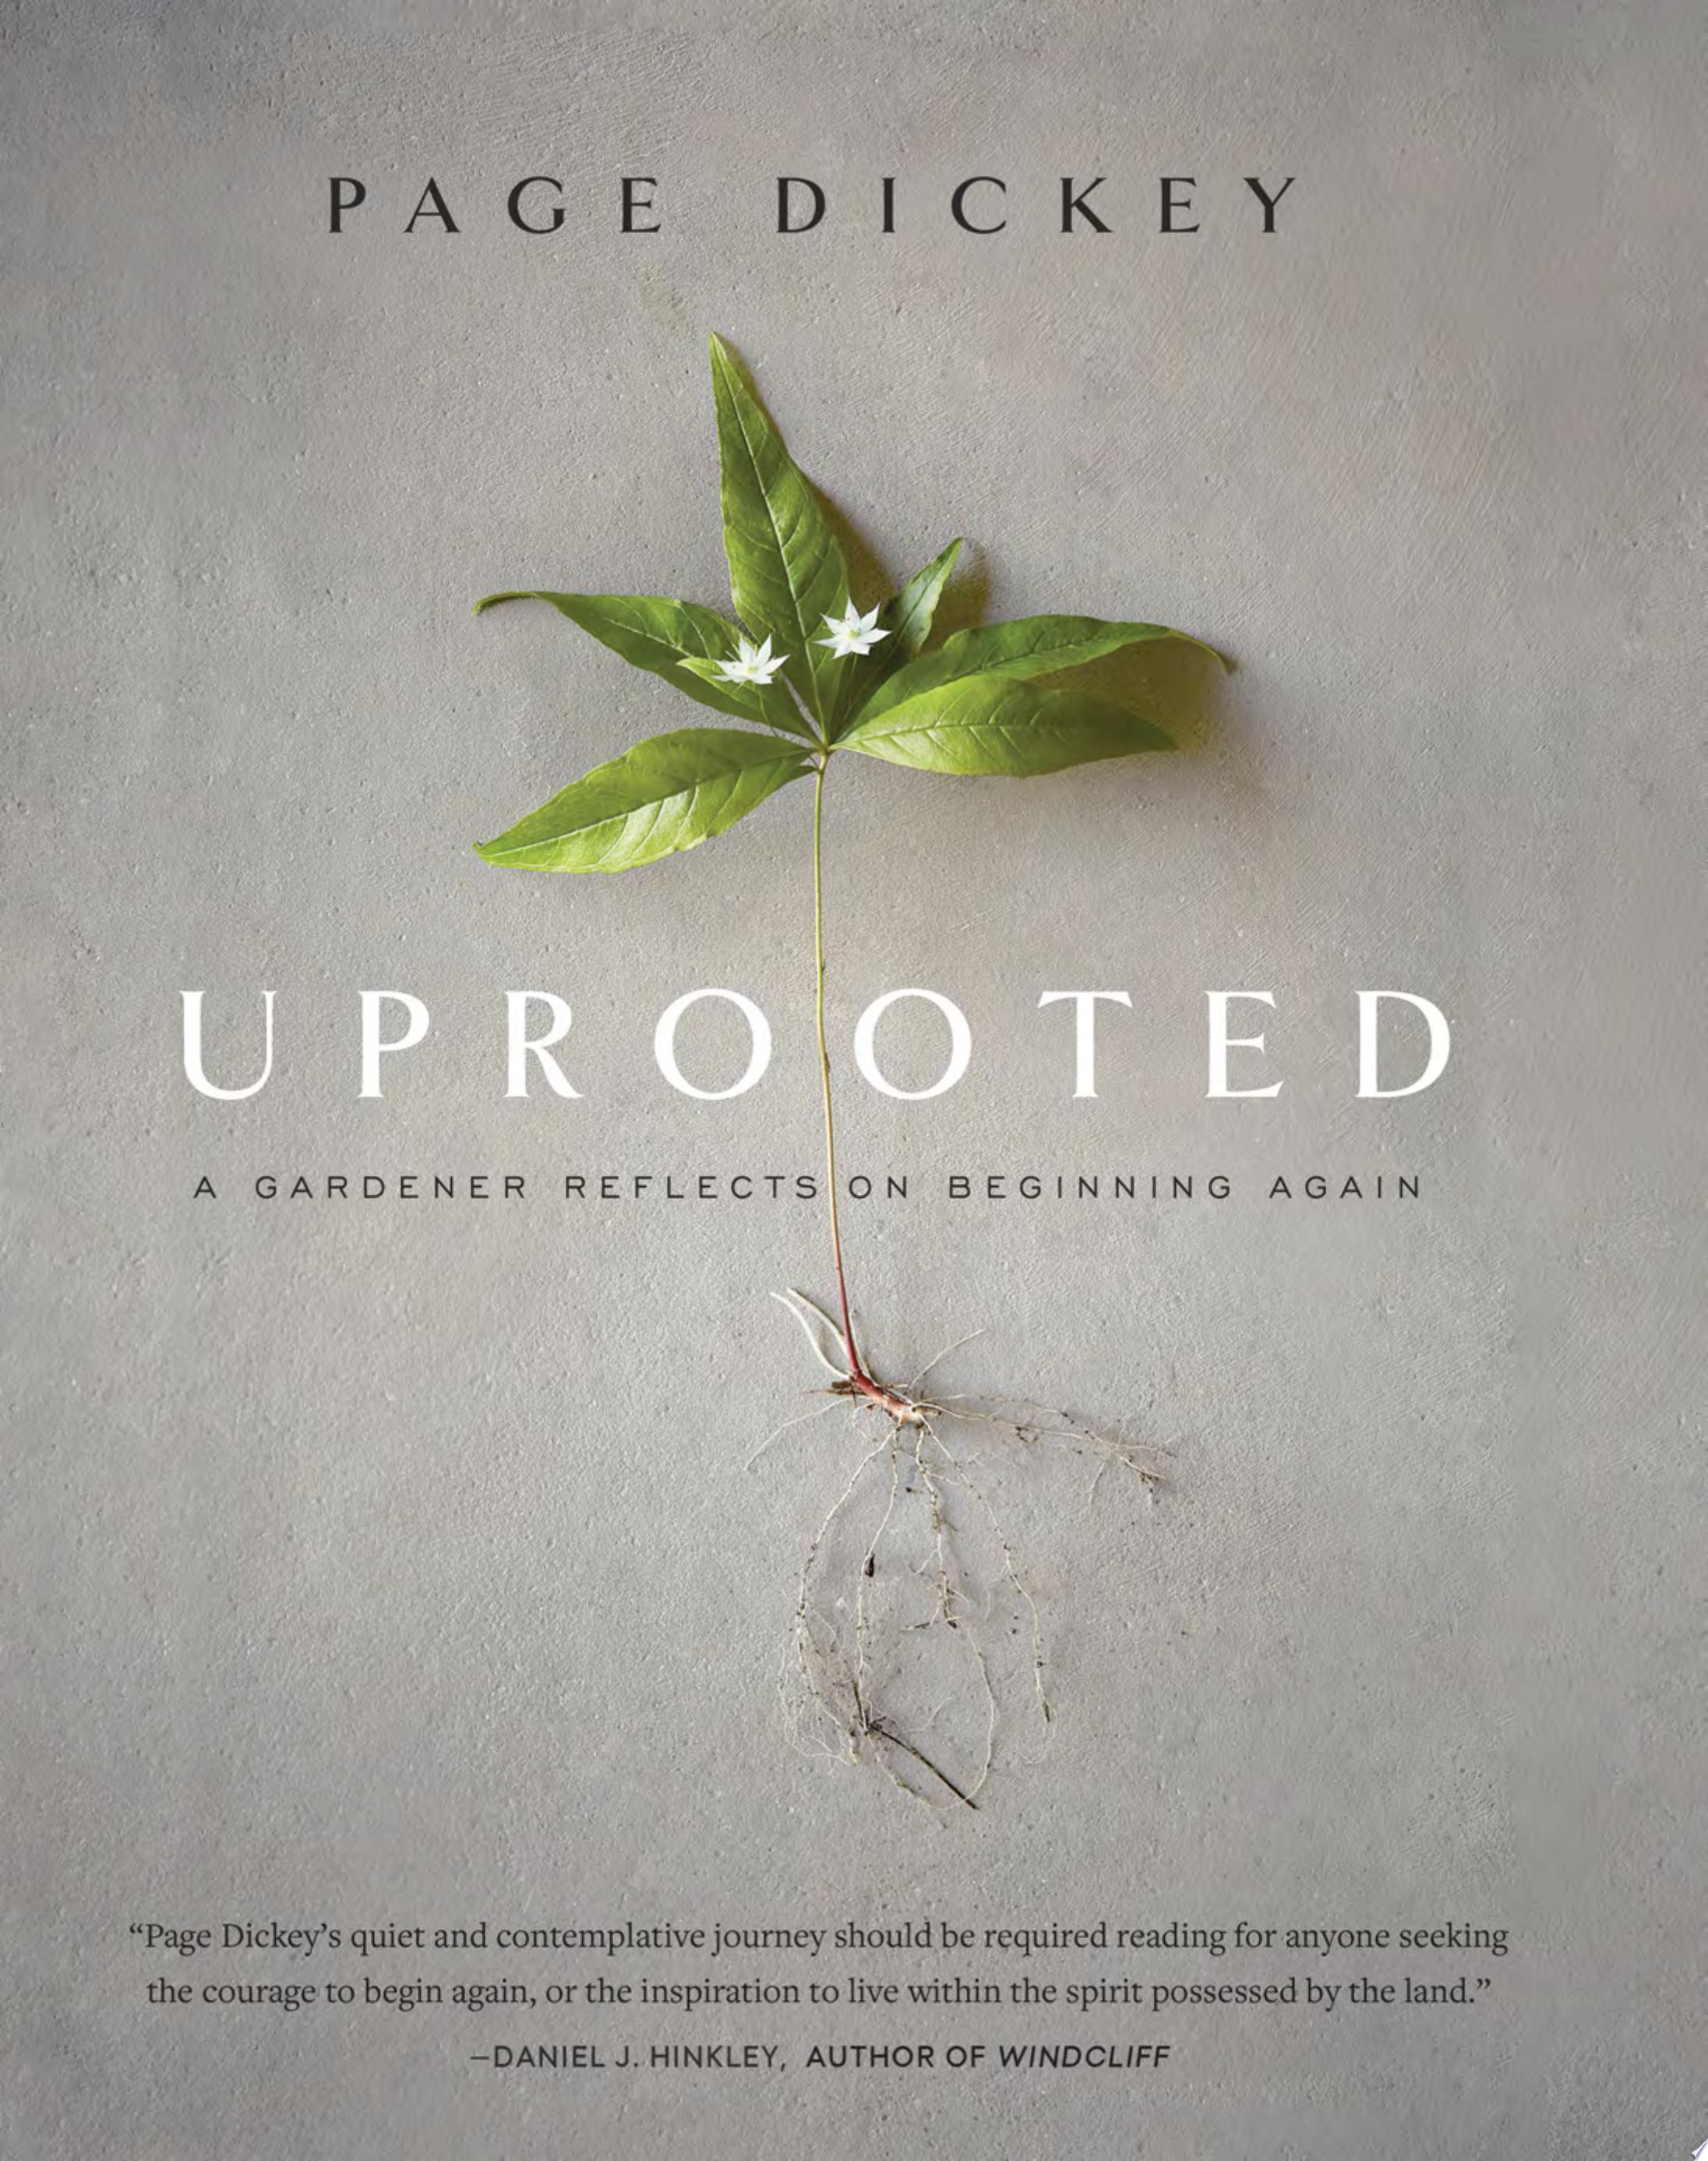 Image for "Uprooted"